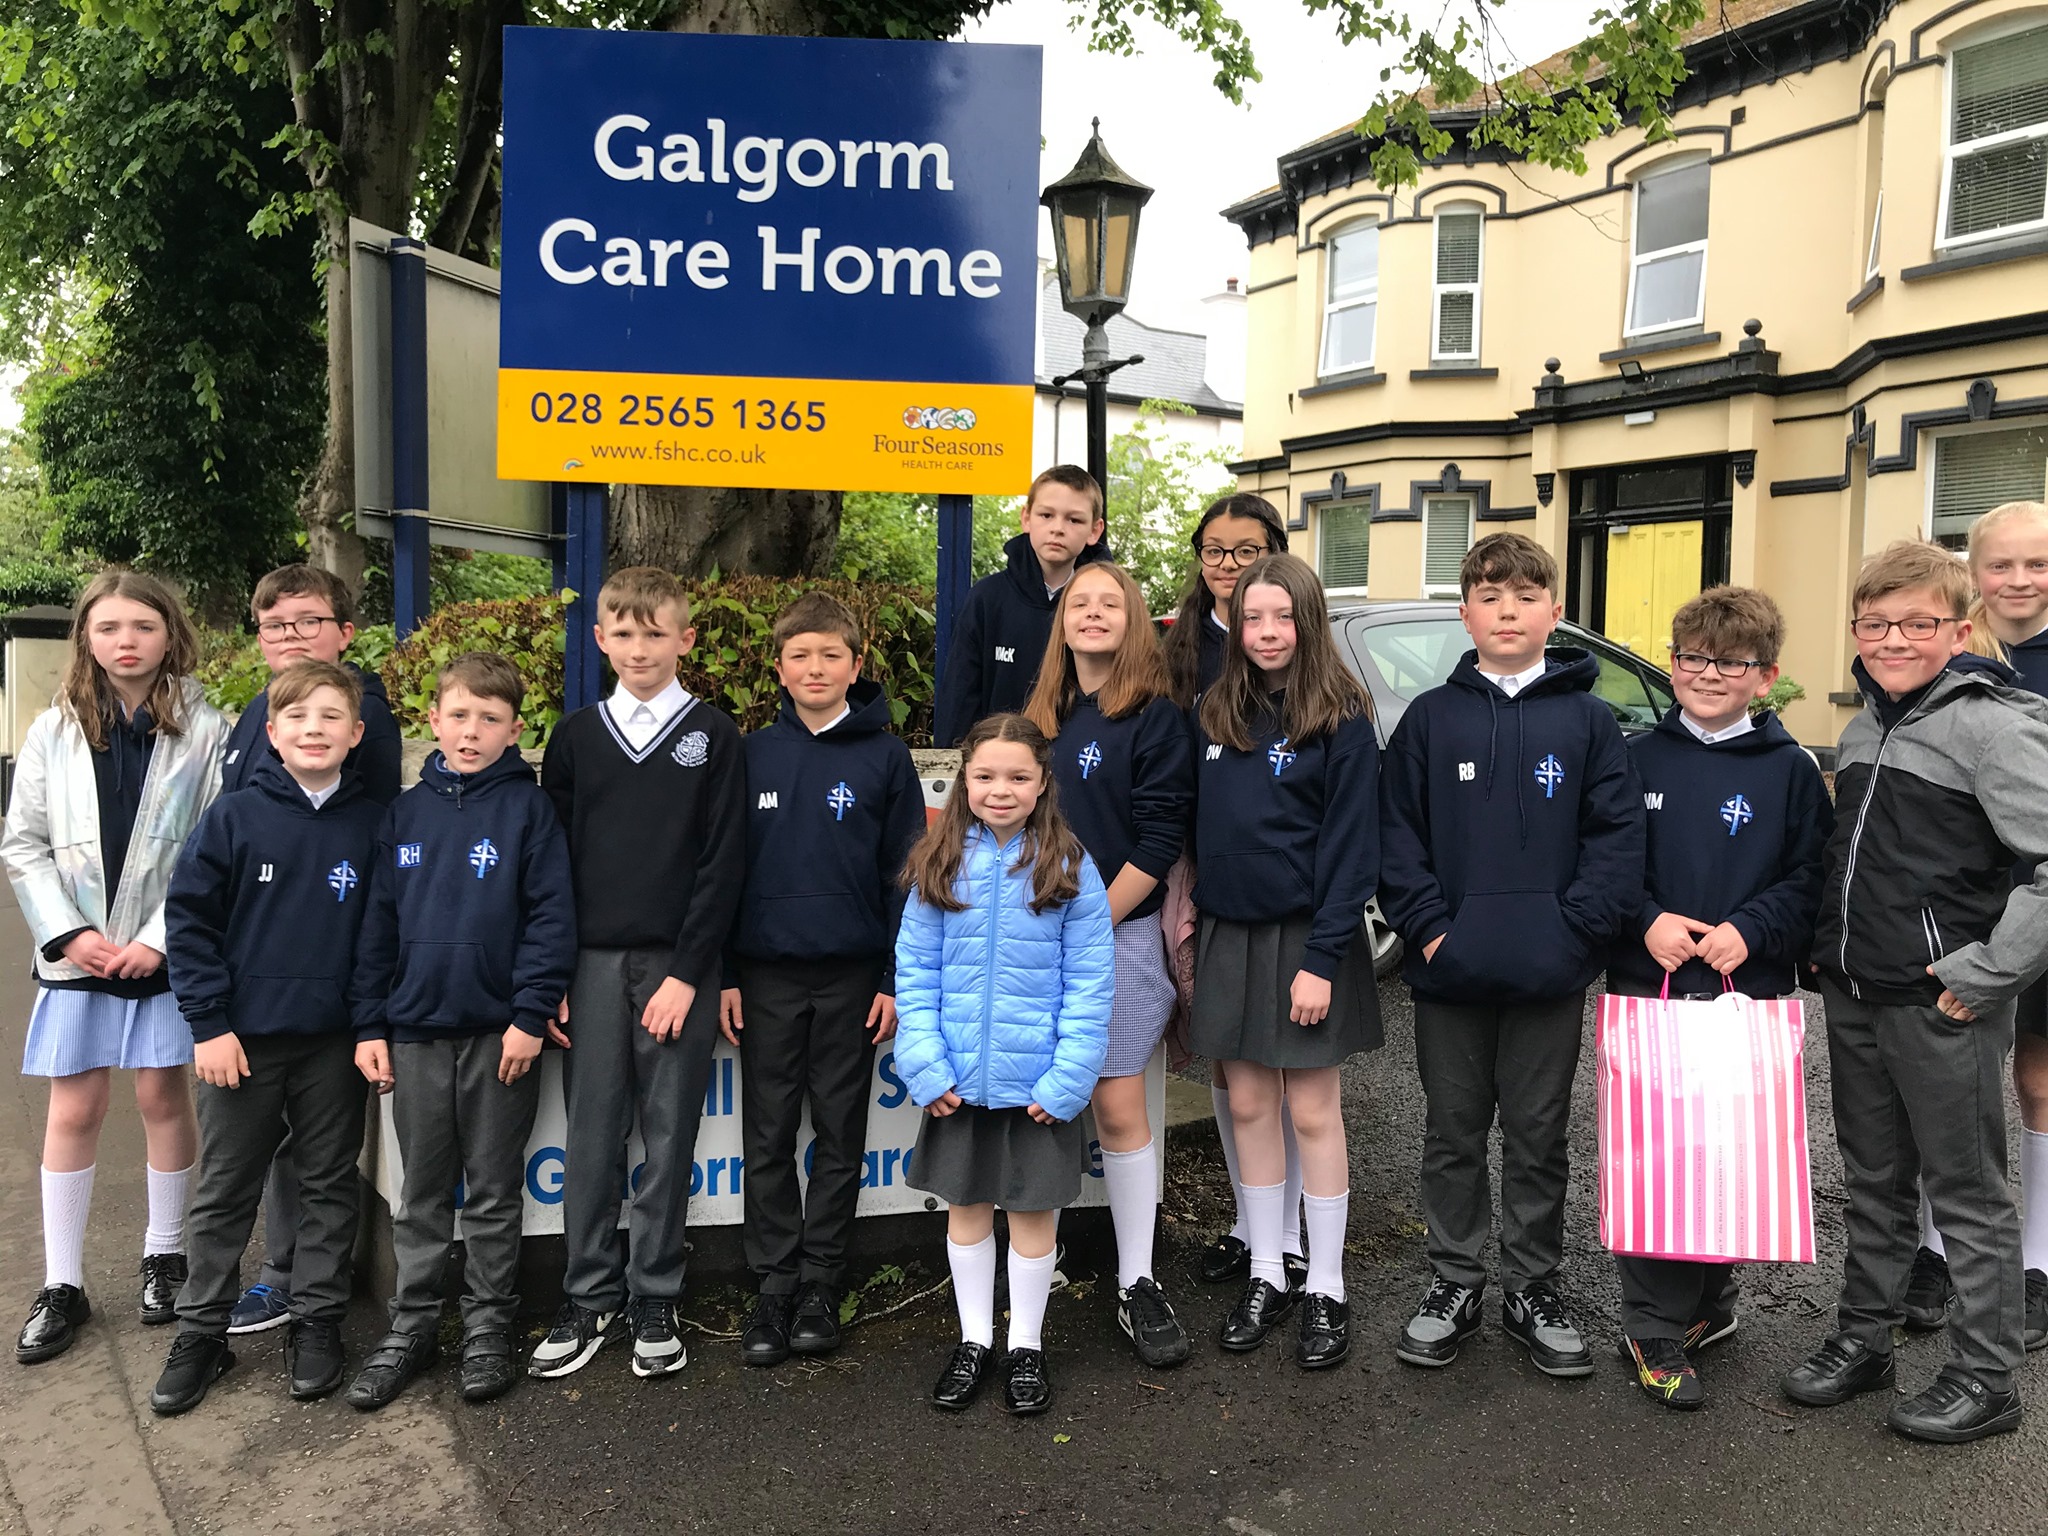 St Colmcille’s Primary School and Galgorm Care Home